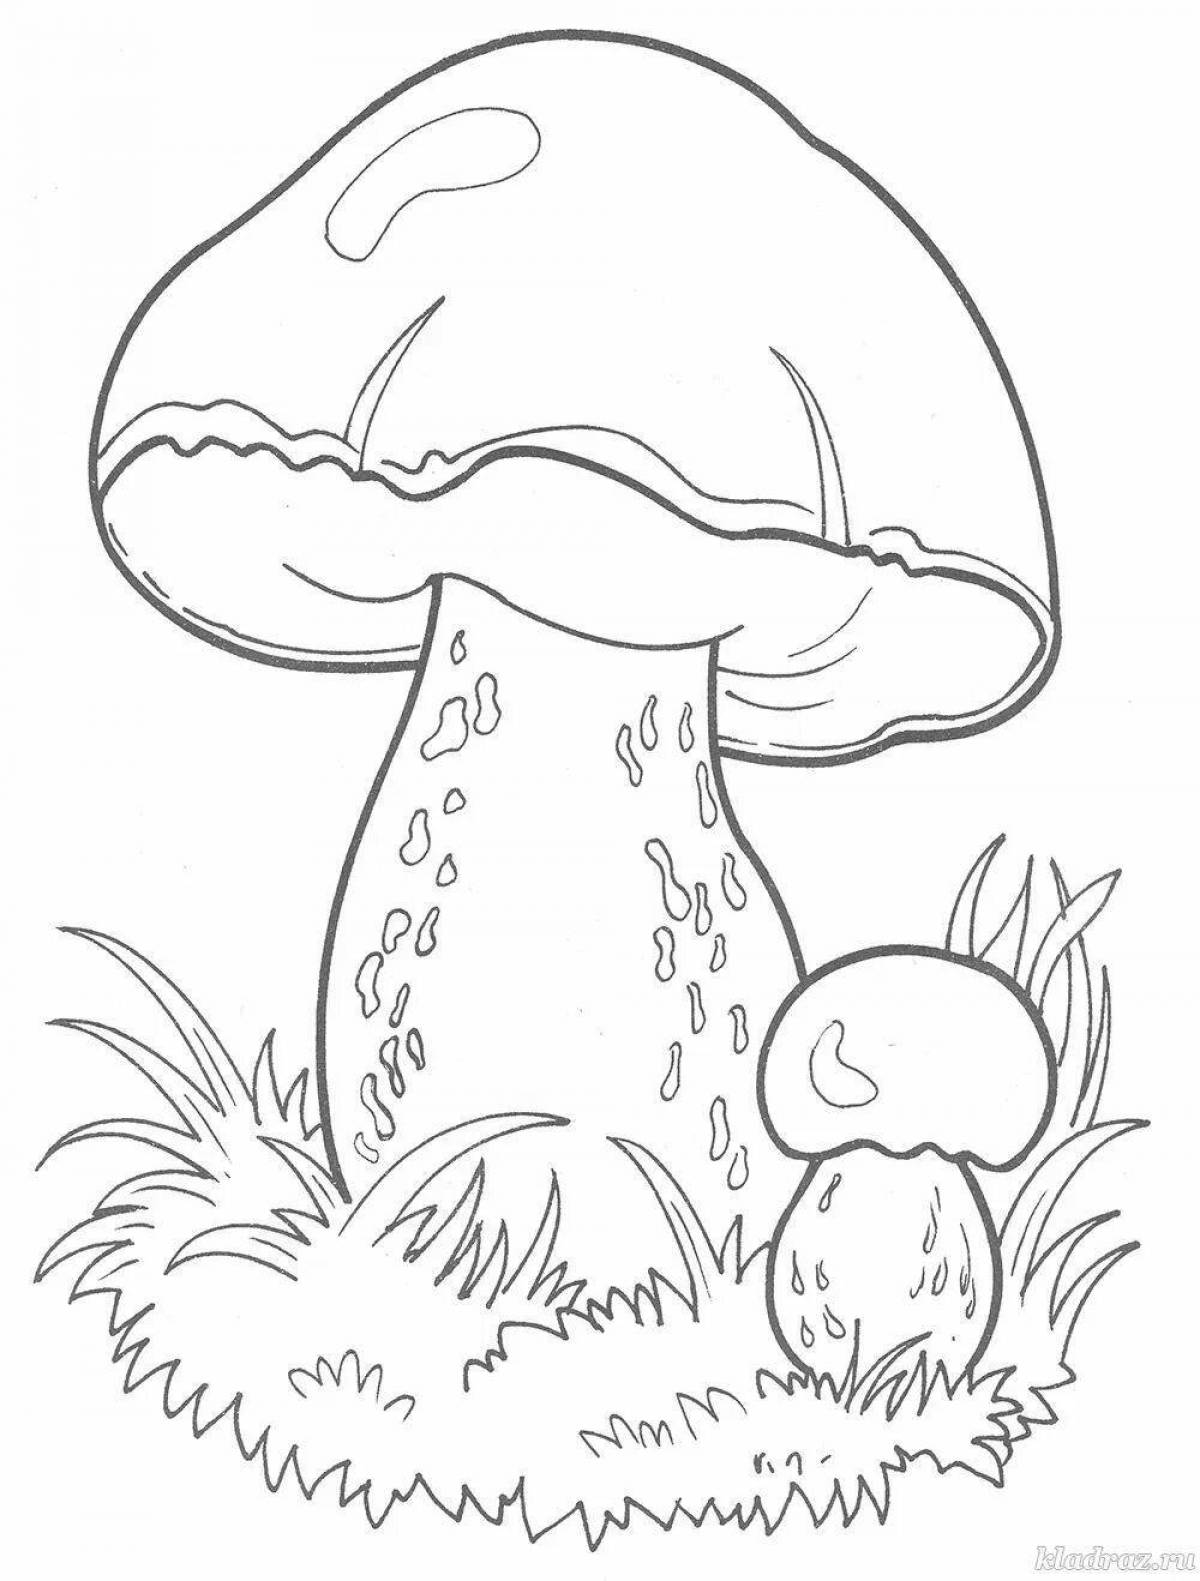 Magic mushroom coloring book for 4-5 year olds